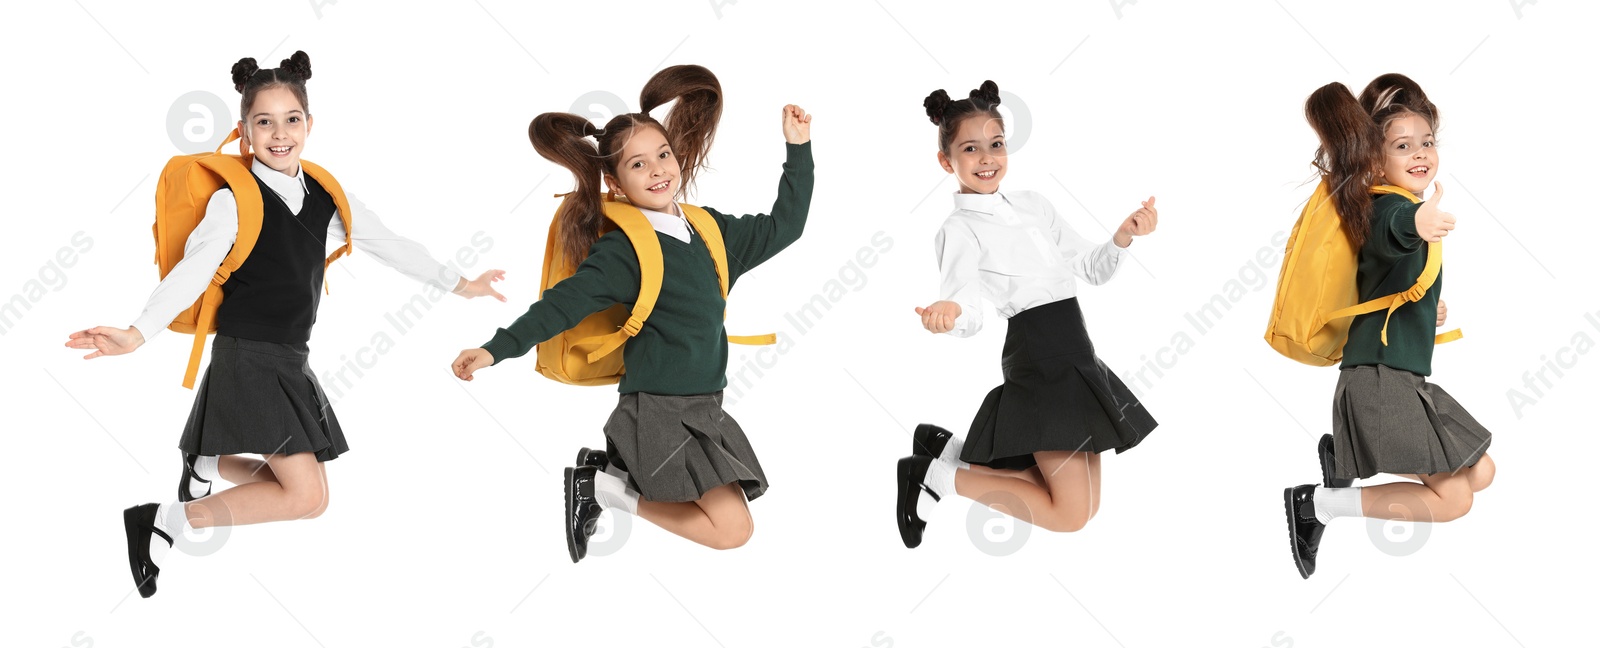 Image of Collage with photos of girl in school uniform jumping on white background. Banner design